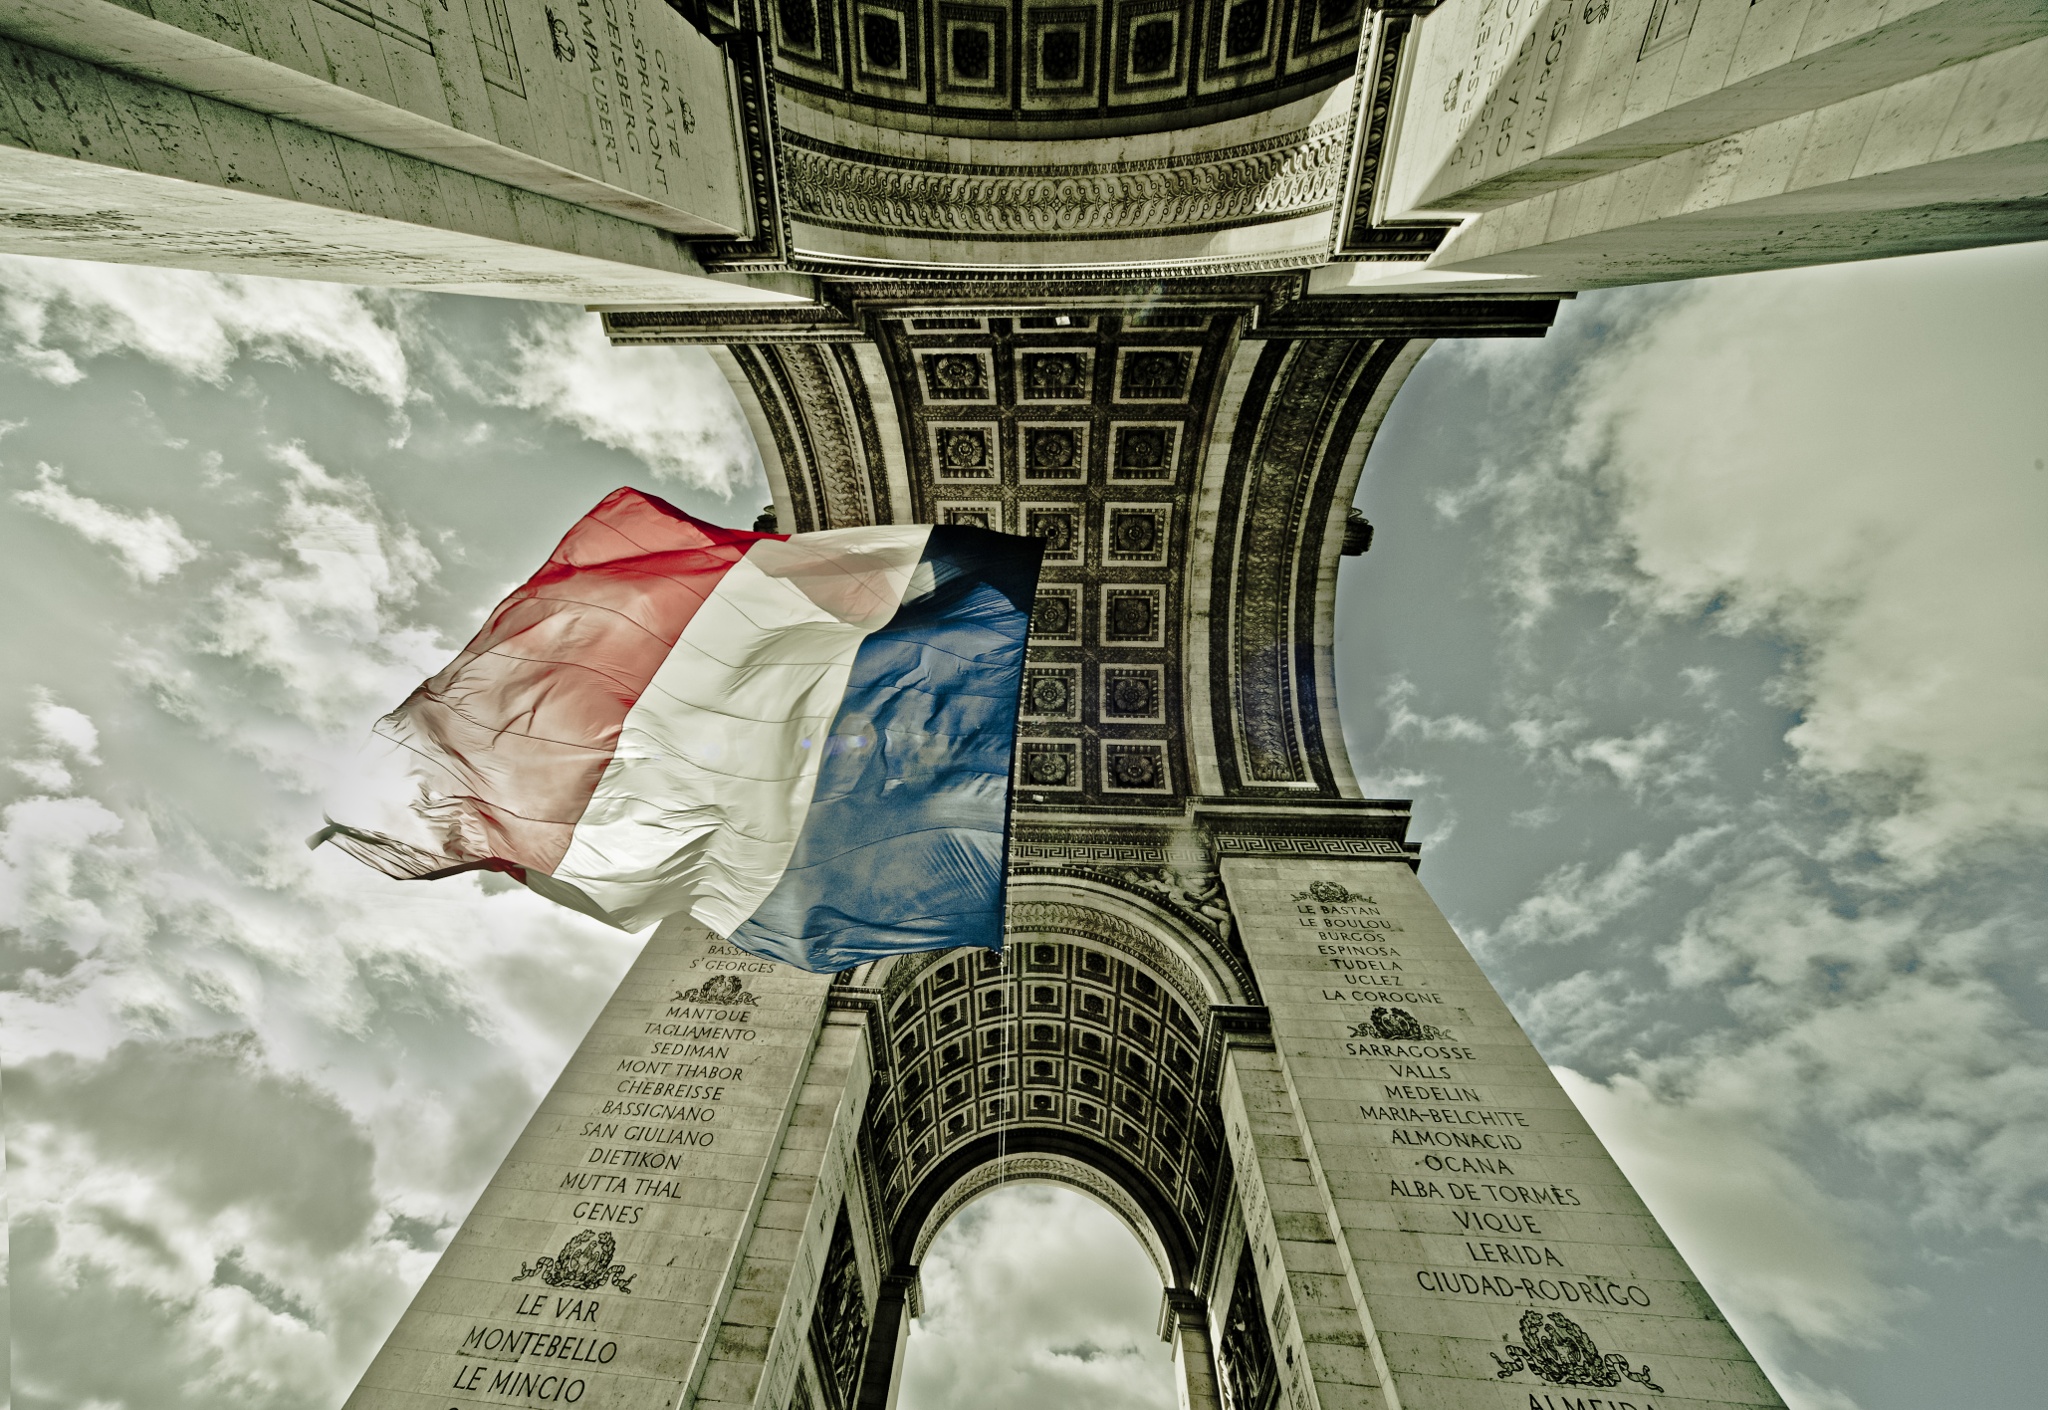 Prayers and Support for the People of Paris